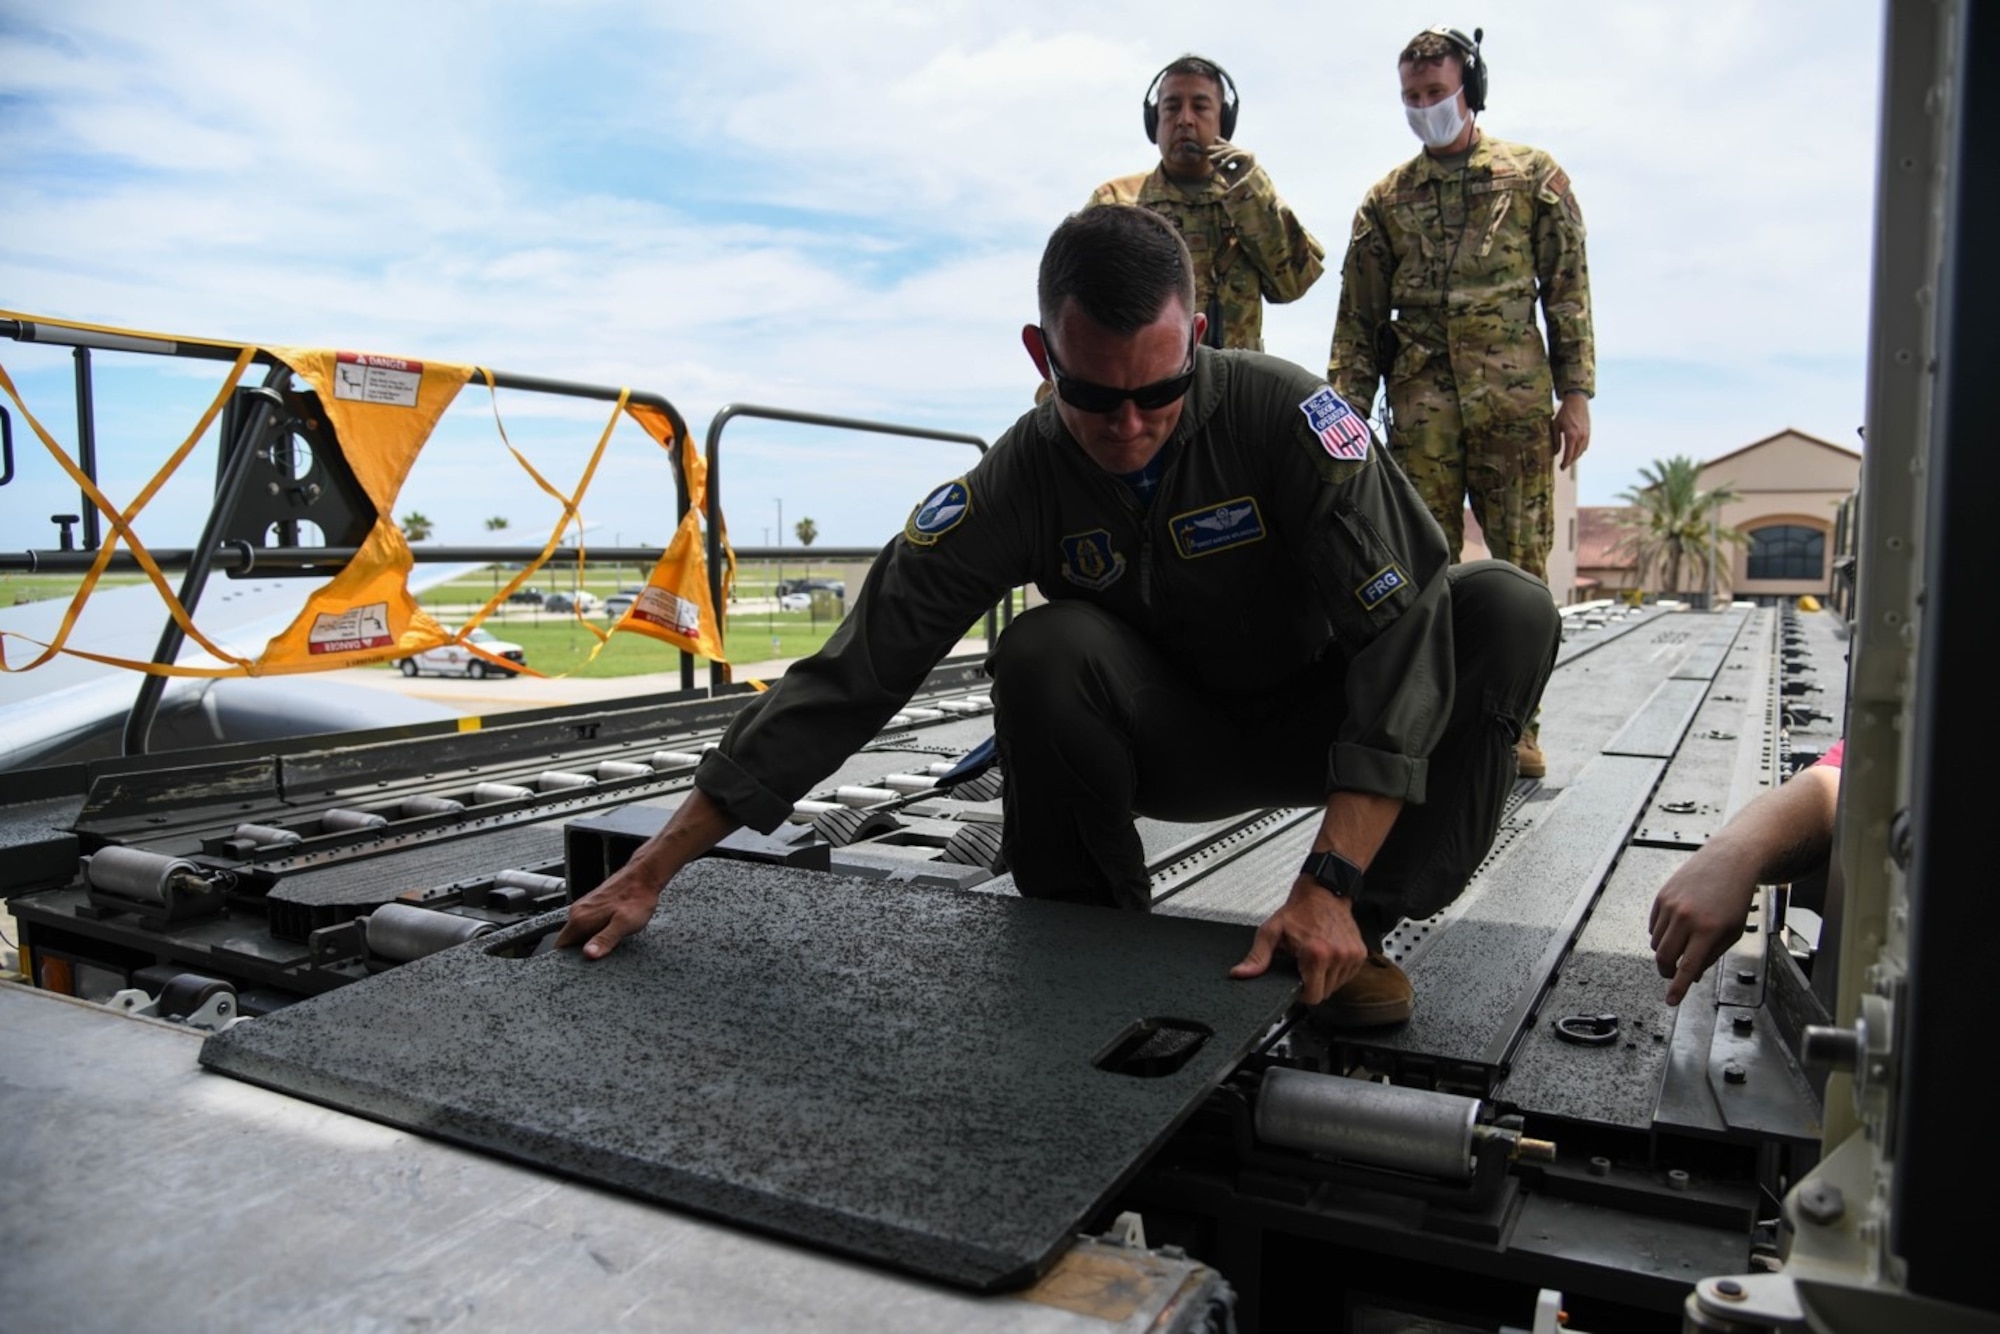 Senior Master Sgt. Aaron McLaughlin, 18th Air Refueling Squadron inflight refueler assigned to McConnell Air Force Base, Kansas places a cargo loader bridge plate prior to patient offload July 11, 2020, at Patrick Air Force Base, Florida. In preparation for the first operational aeromedical evacuation mission, three separate aeromedical evacuations were simulated to help determine the usability of medical equipment, capacity of patients and proper aircraft staging. (U.S. Air Force photo by Airman 1st Class Nilsa Garcia)